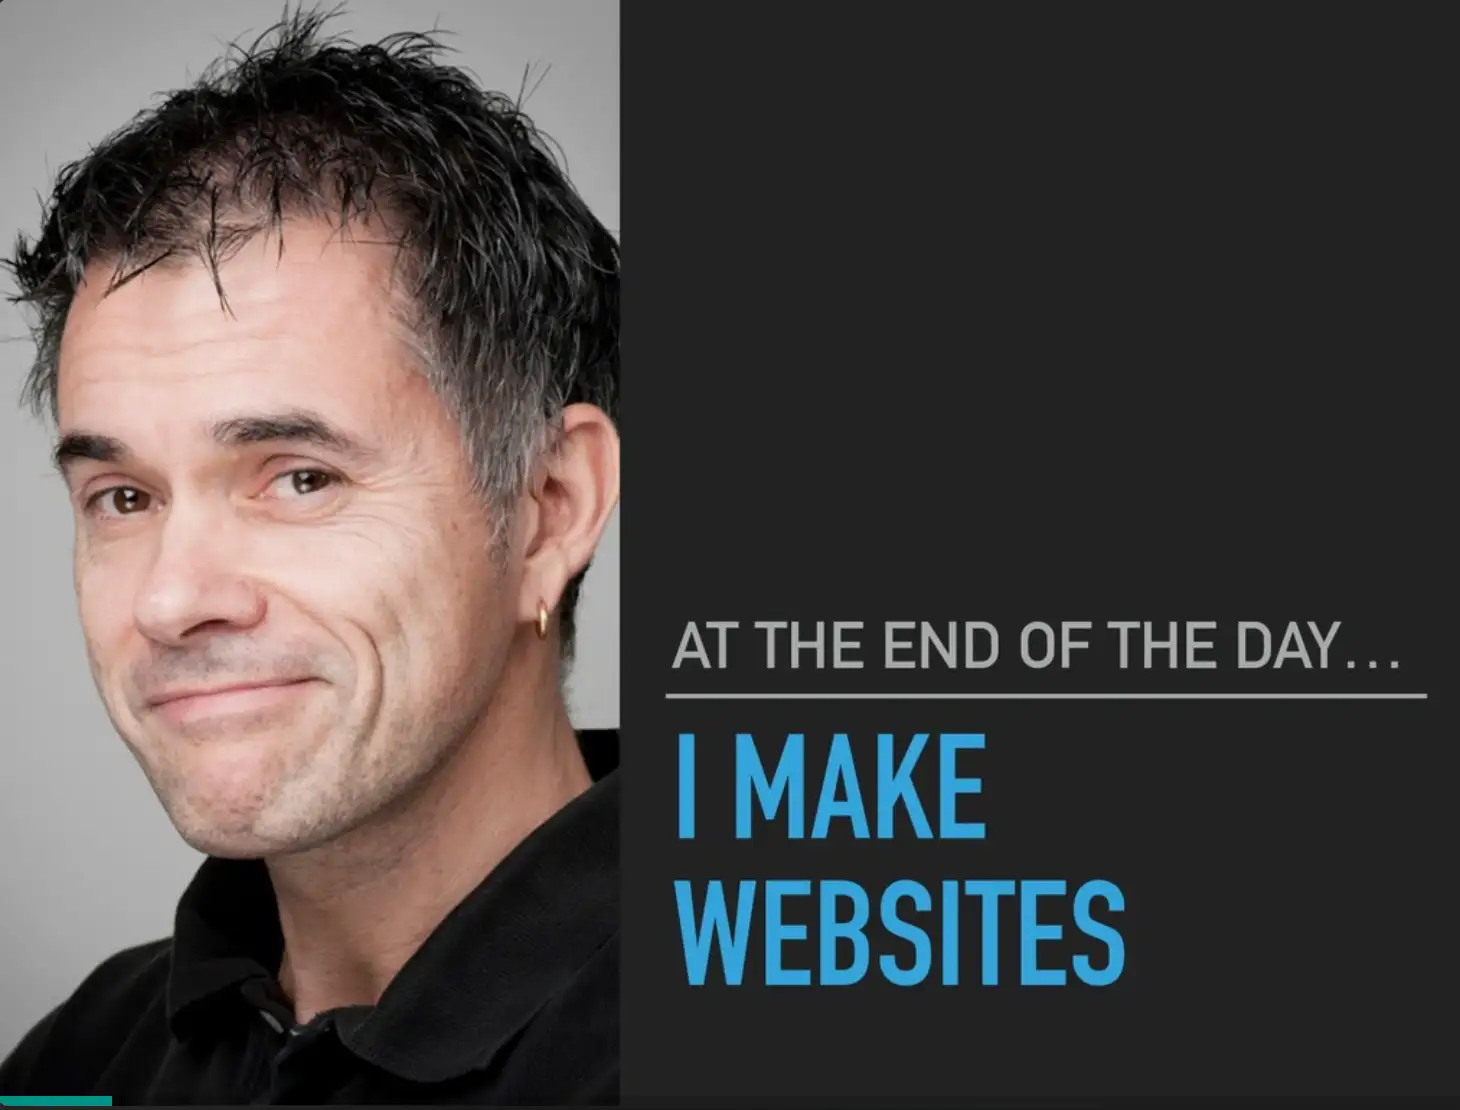 Same slide, but with the mention « at the end of the day, I make websites »